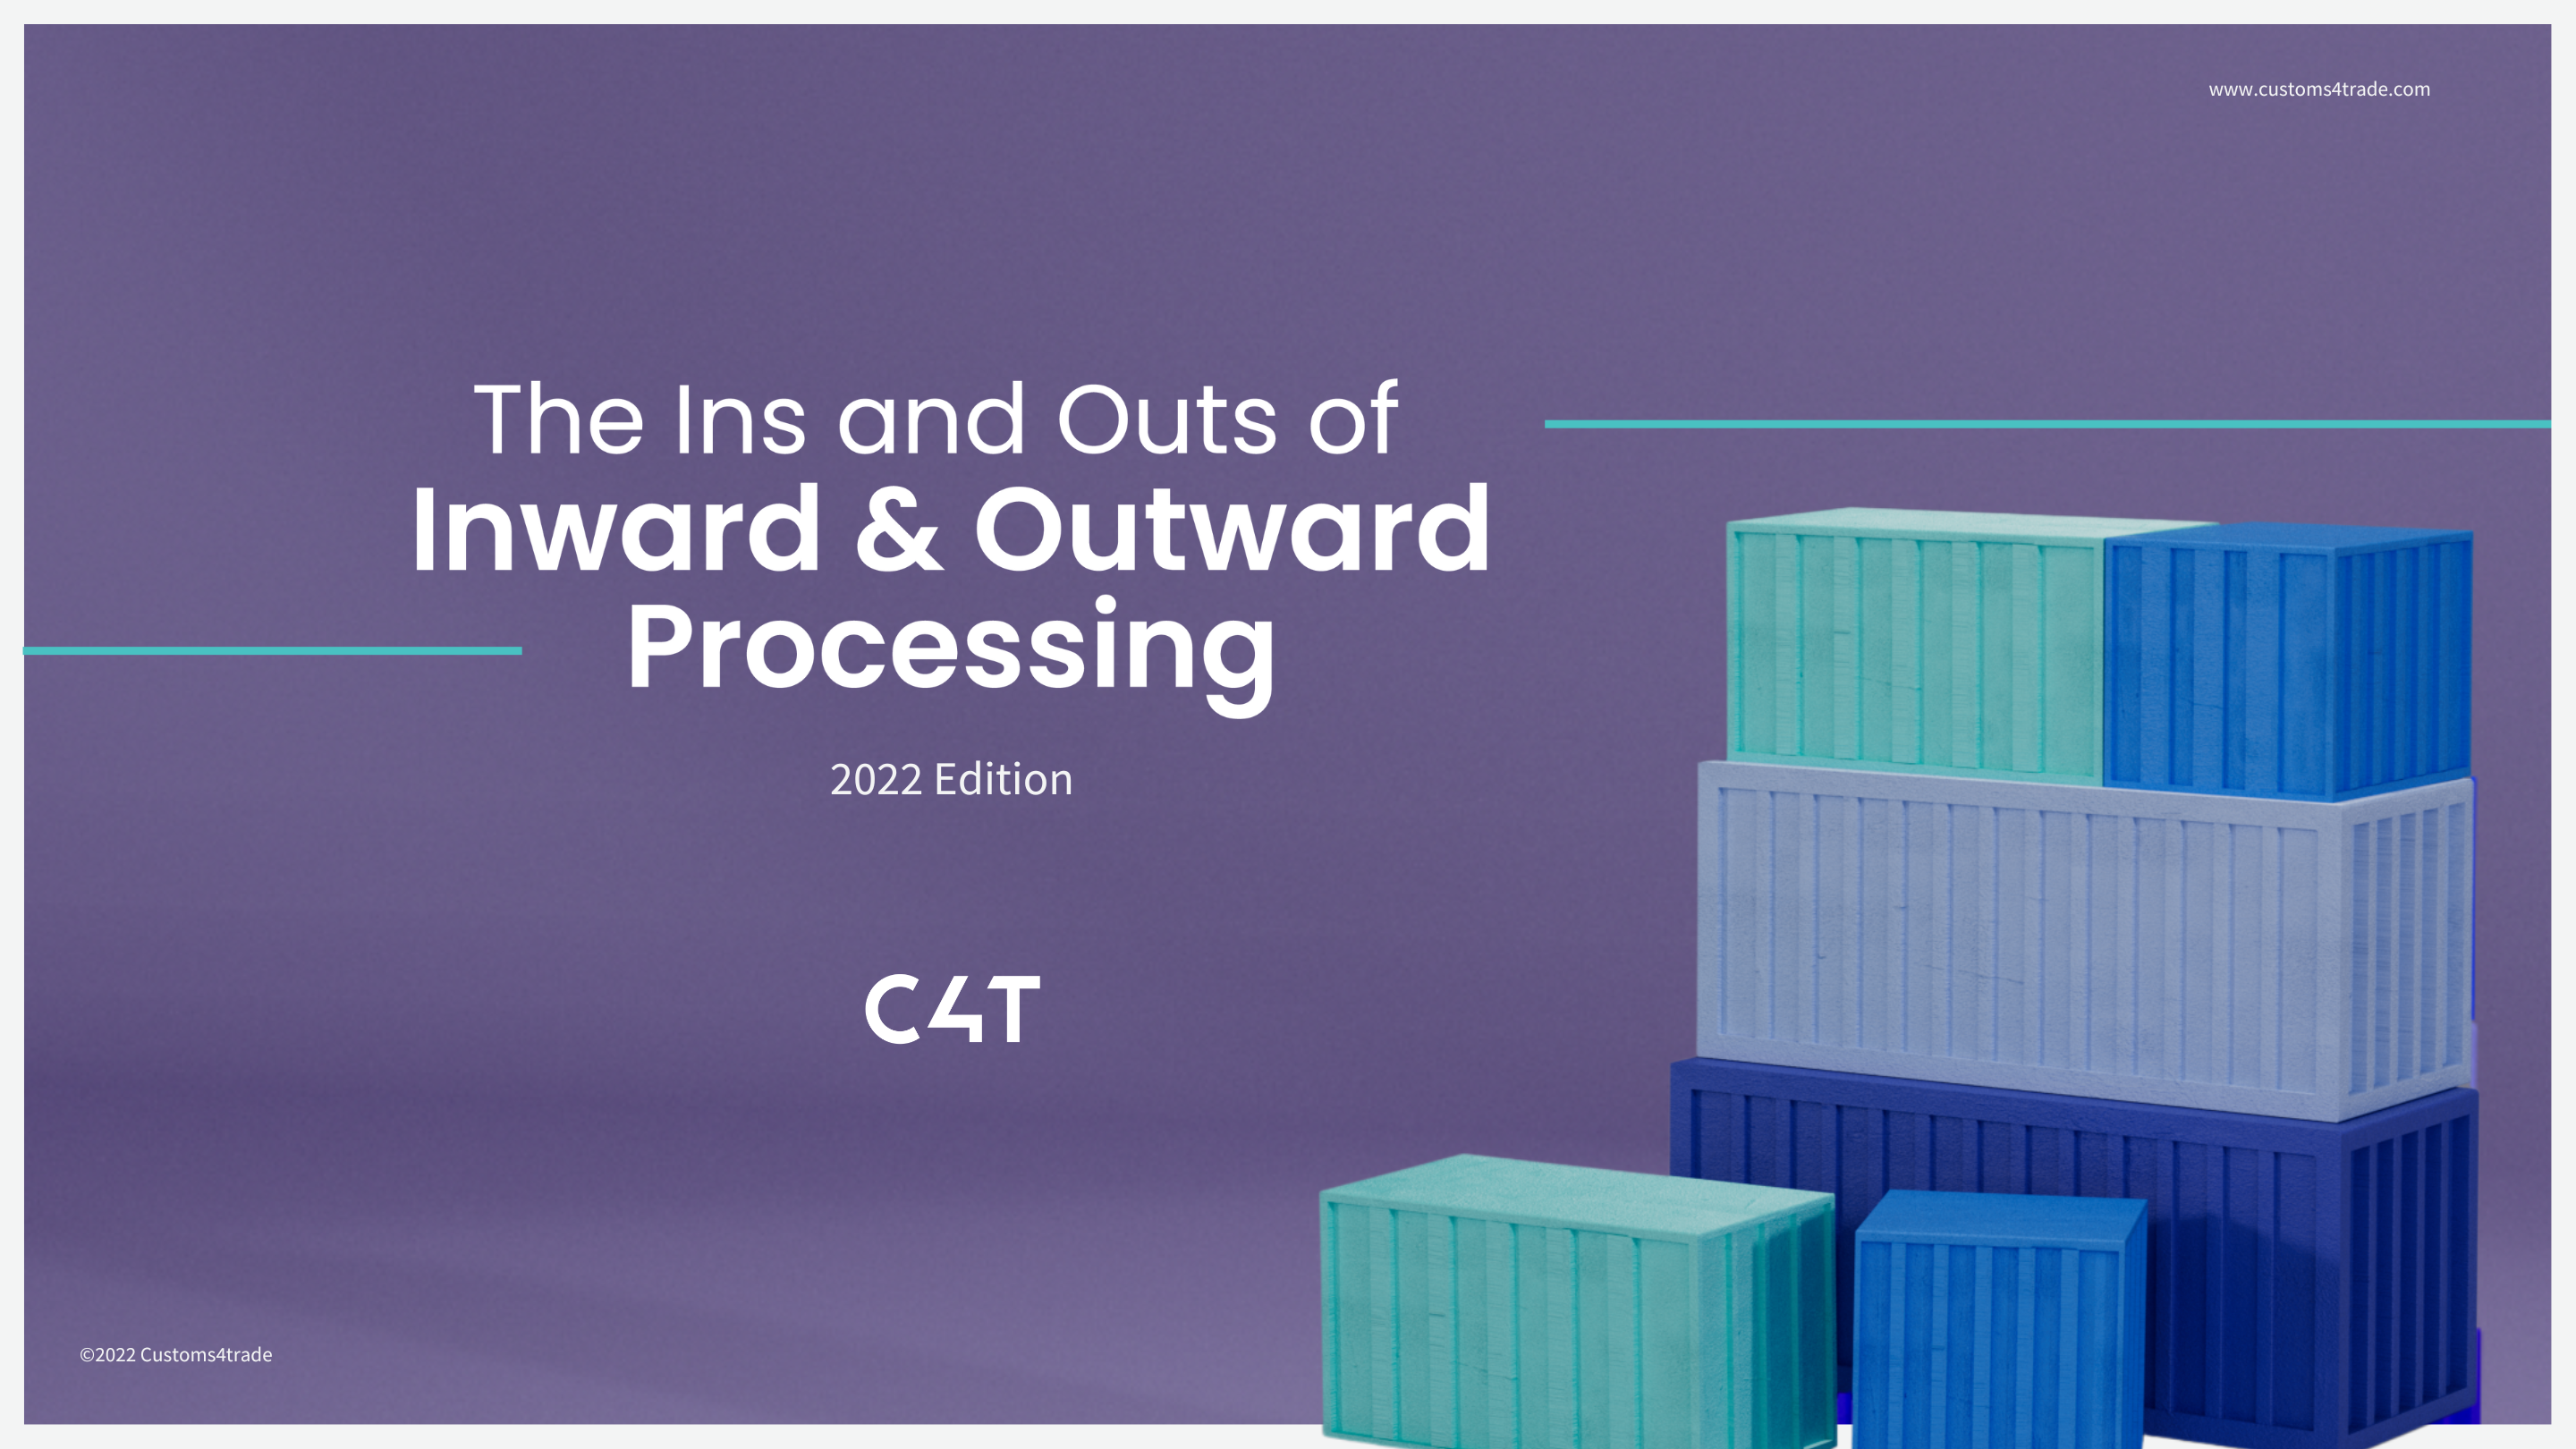 Inward & Outward Processing White paper